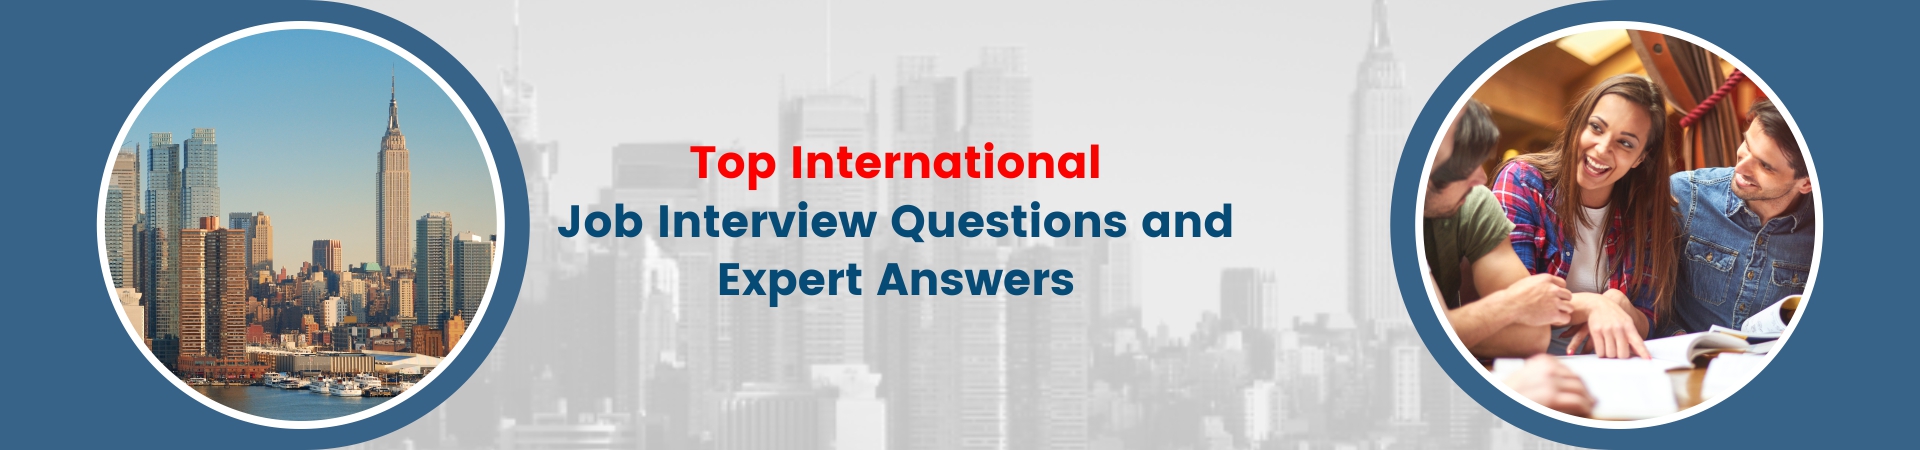 Top International Job Interview Questions and Expert Answers